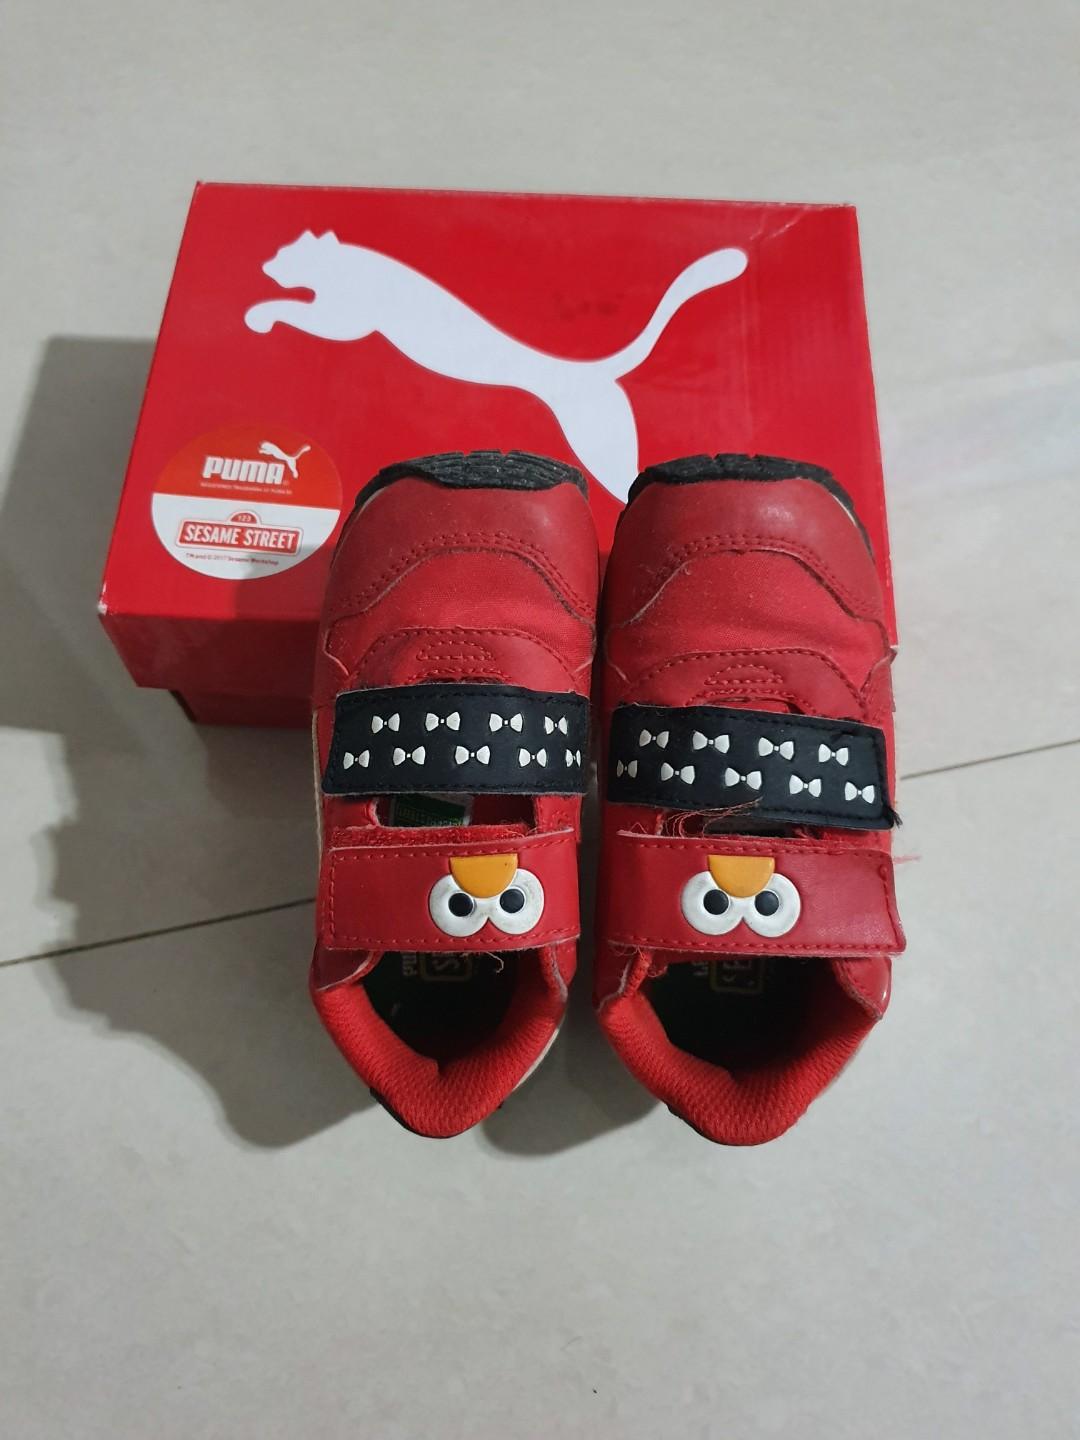 puma toddler shoes size 7